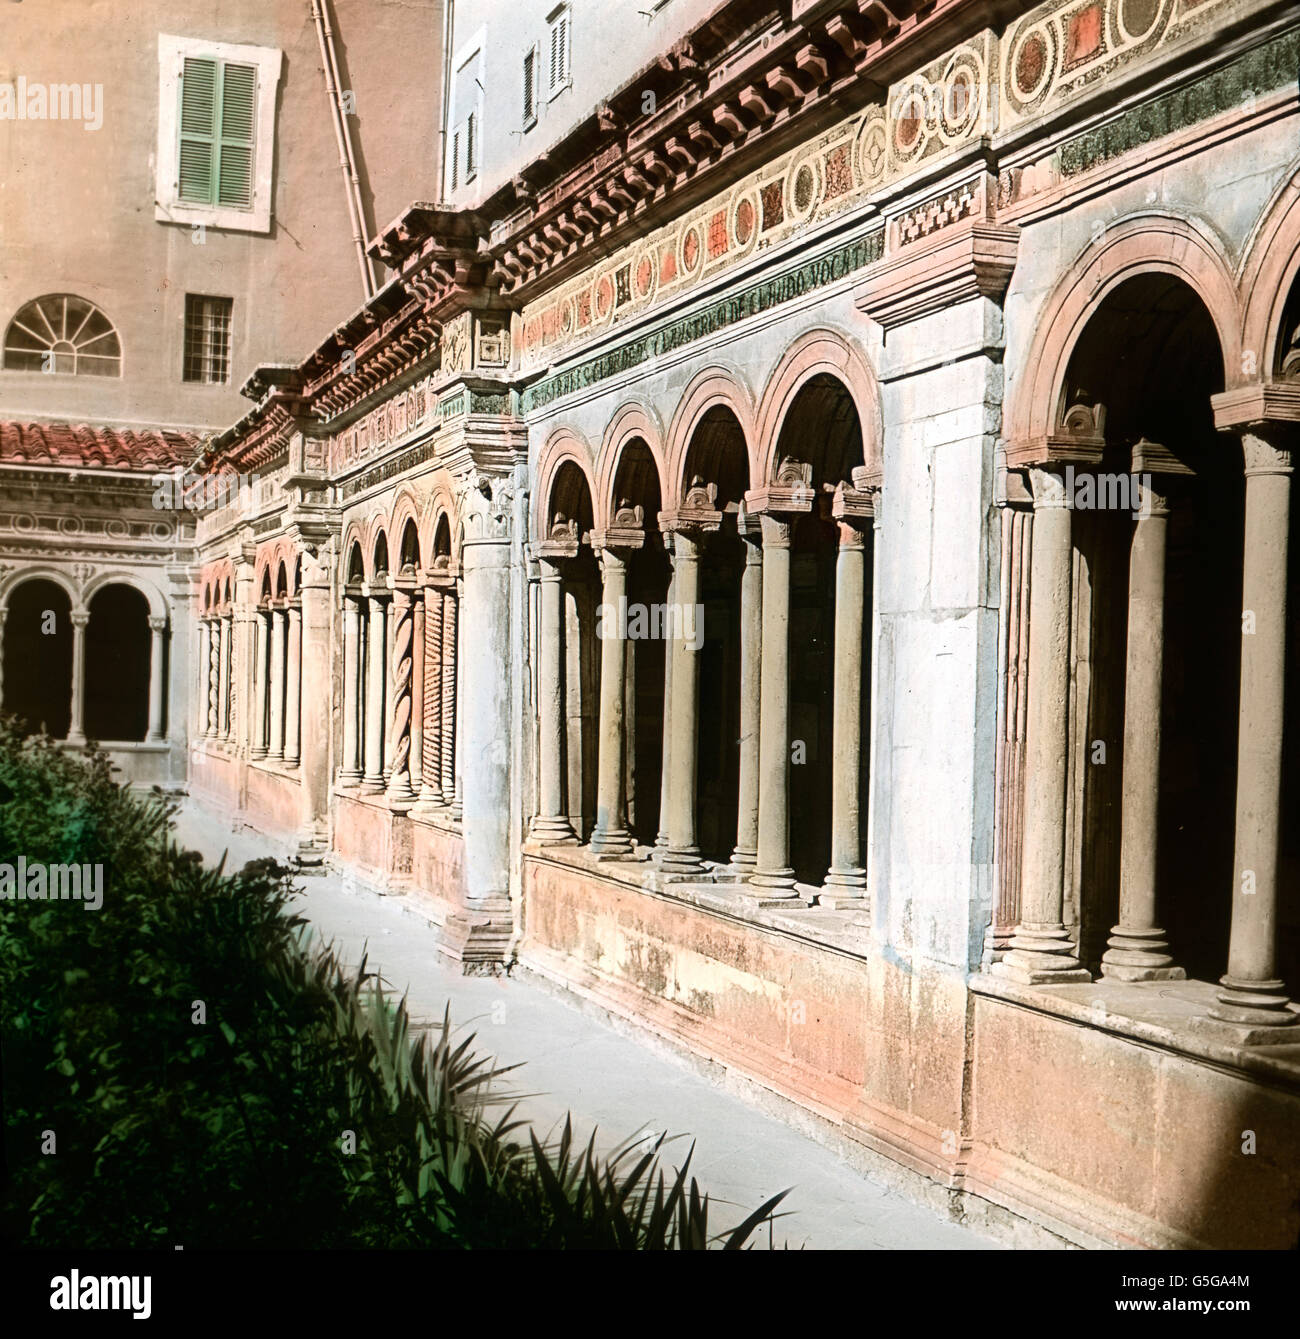 Kreuzgang der Kirche S. Paolo. Cloister of the S. Paolo church in the city of Rome. architecture, columns, fine arts, buidling, Europe, Italy, Rome, history, historical, 1910s, 1920s, 20th century, archive, Carl Simon, hand-coloured glass slide Stock Photo